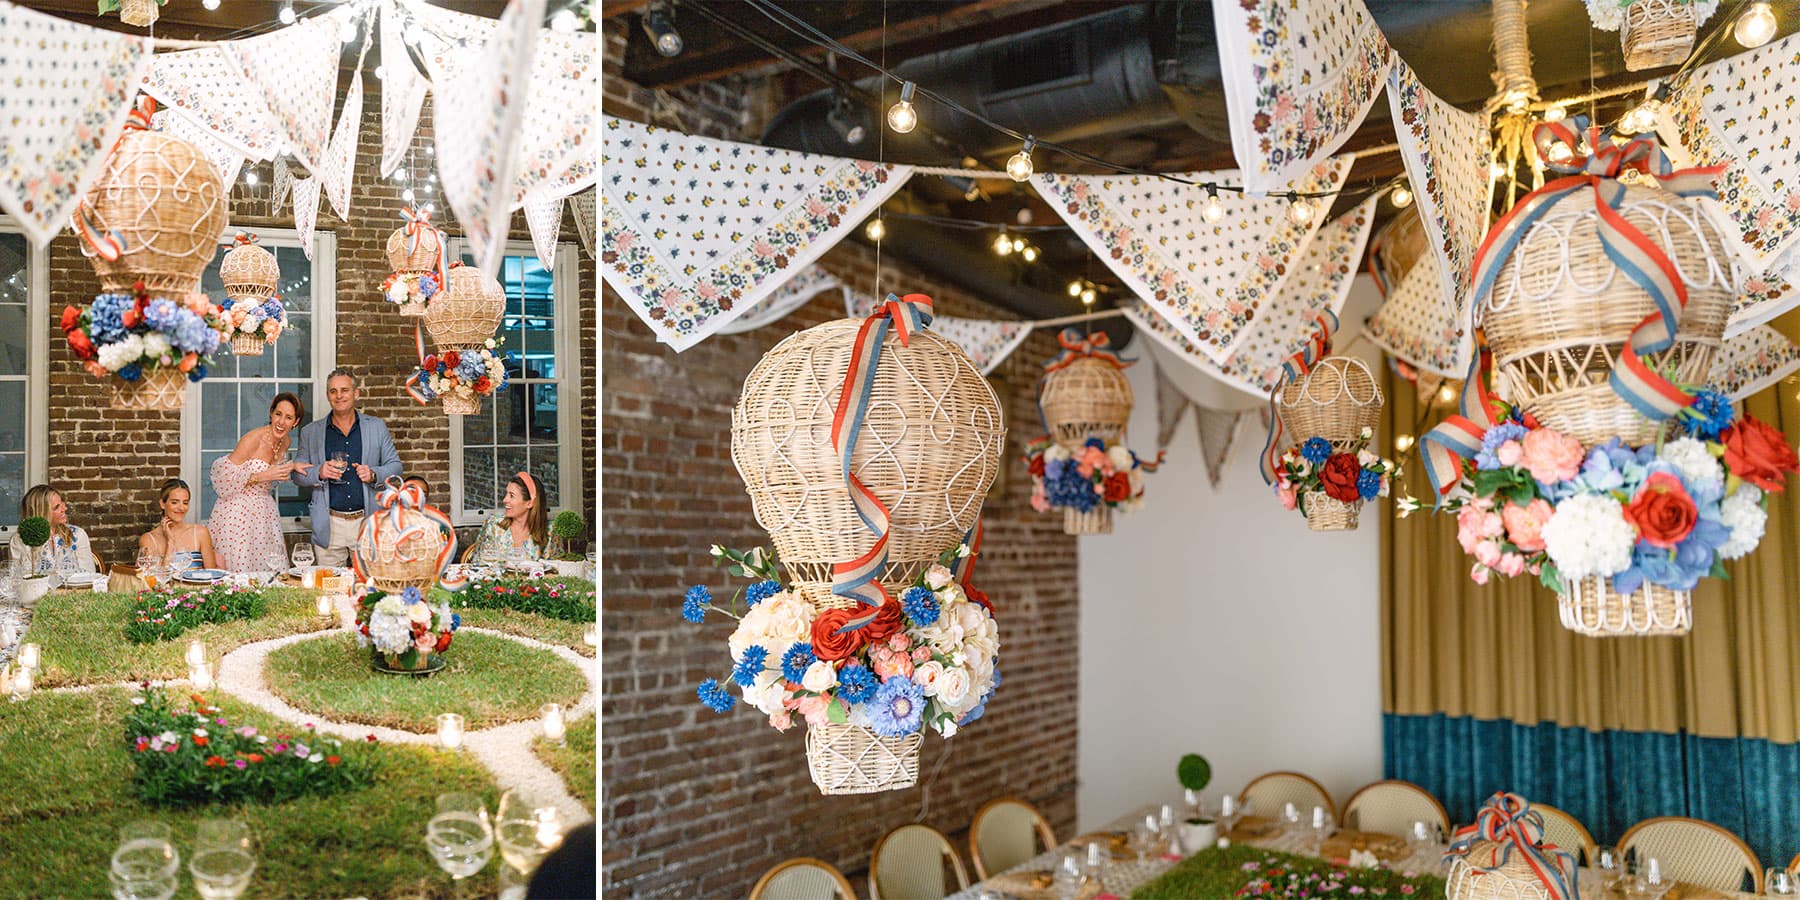 Dozens of our Jardin du Monde hot air balloons floated above, festooned with red, cream, and periwinkle blue flowers as an homage to our French, English, and American heritage that is so emblematic of our style.